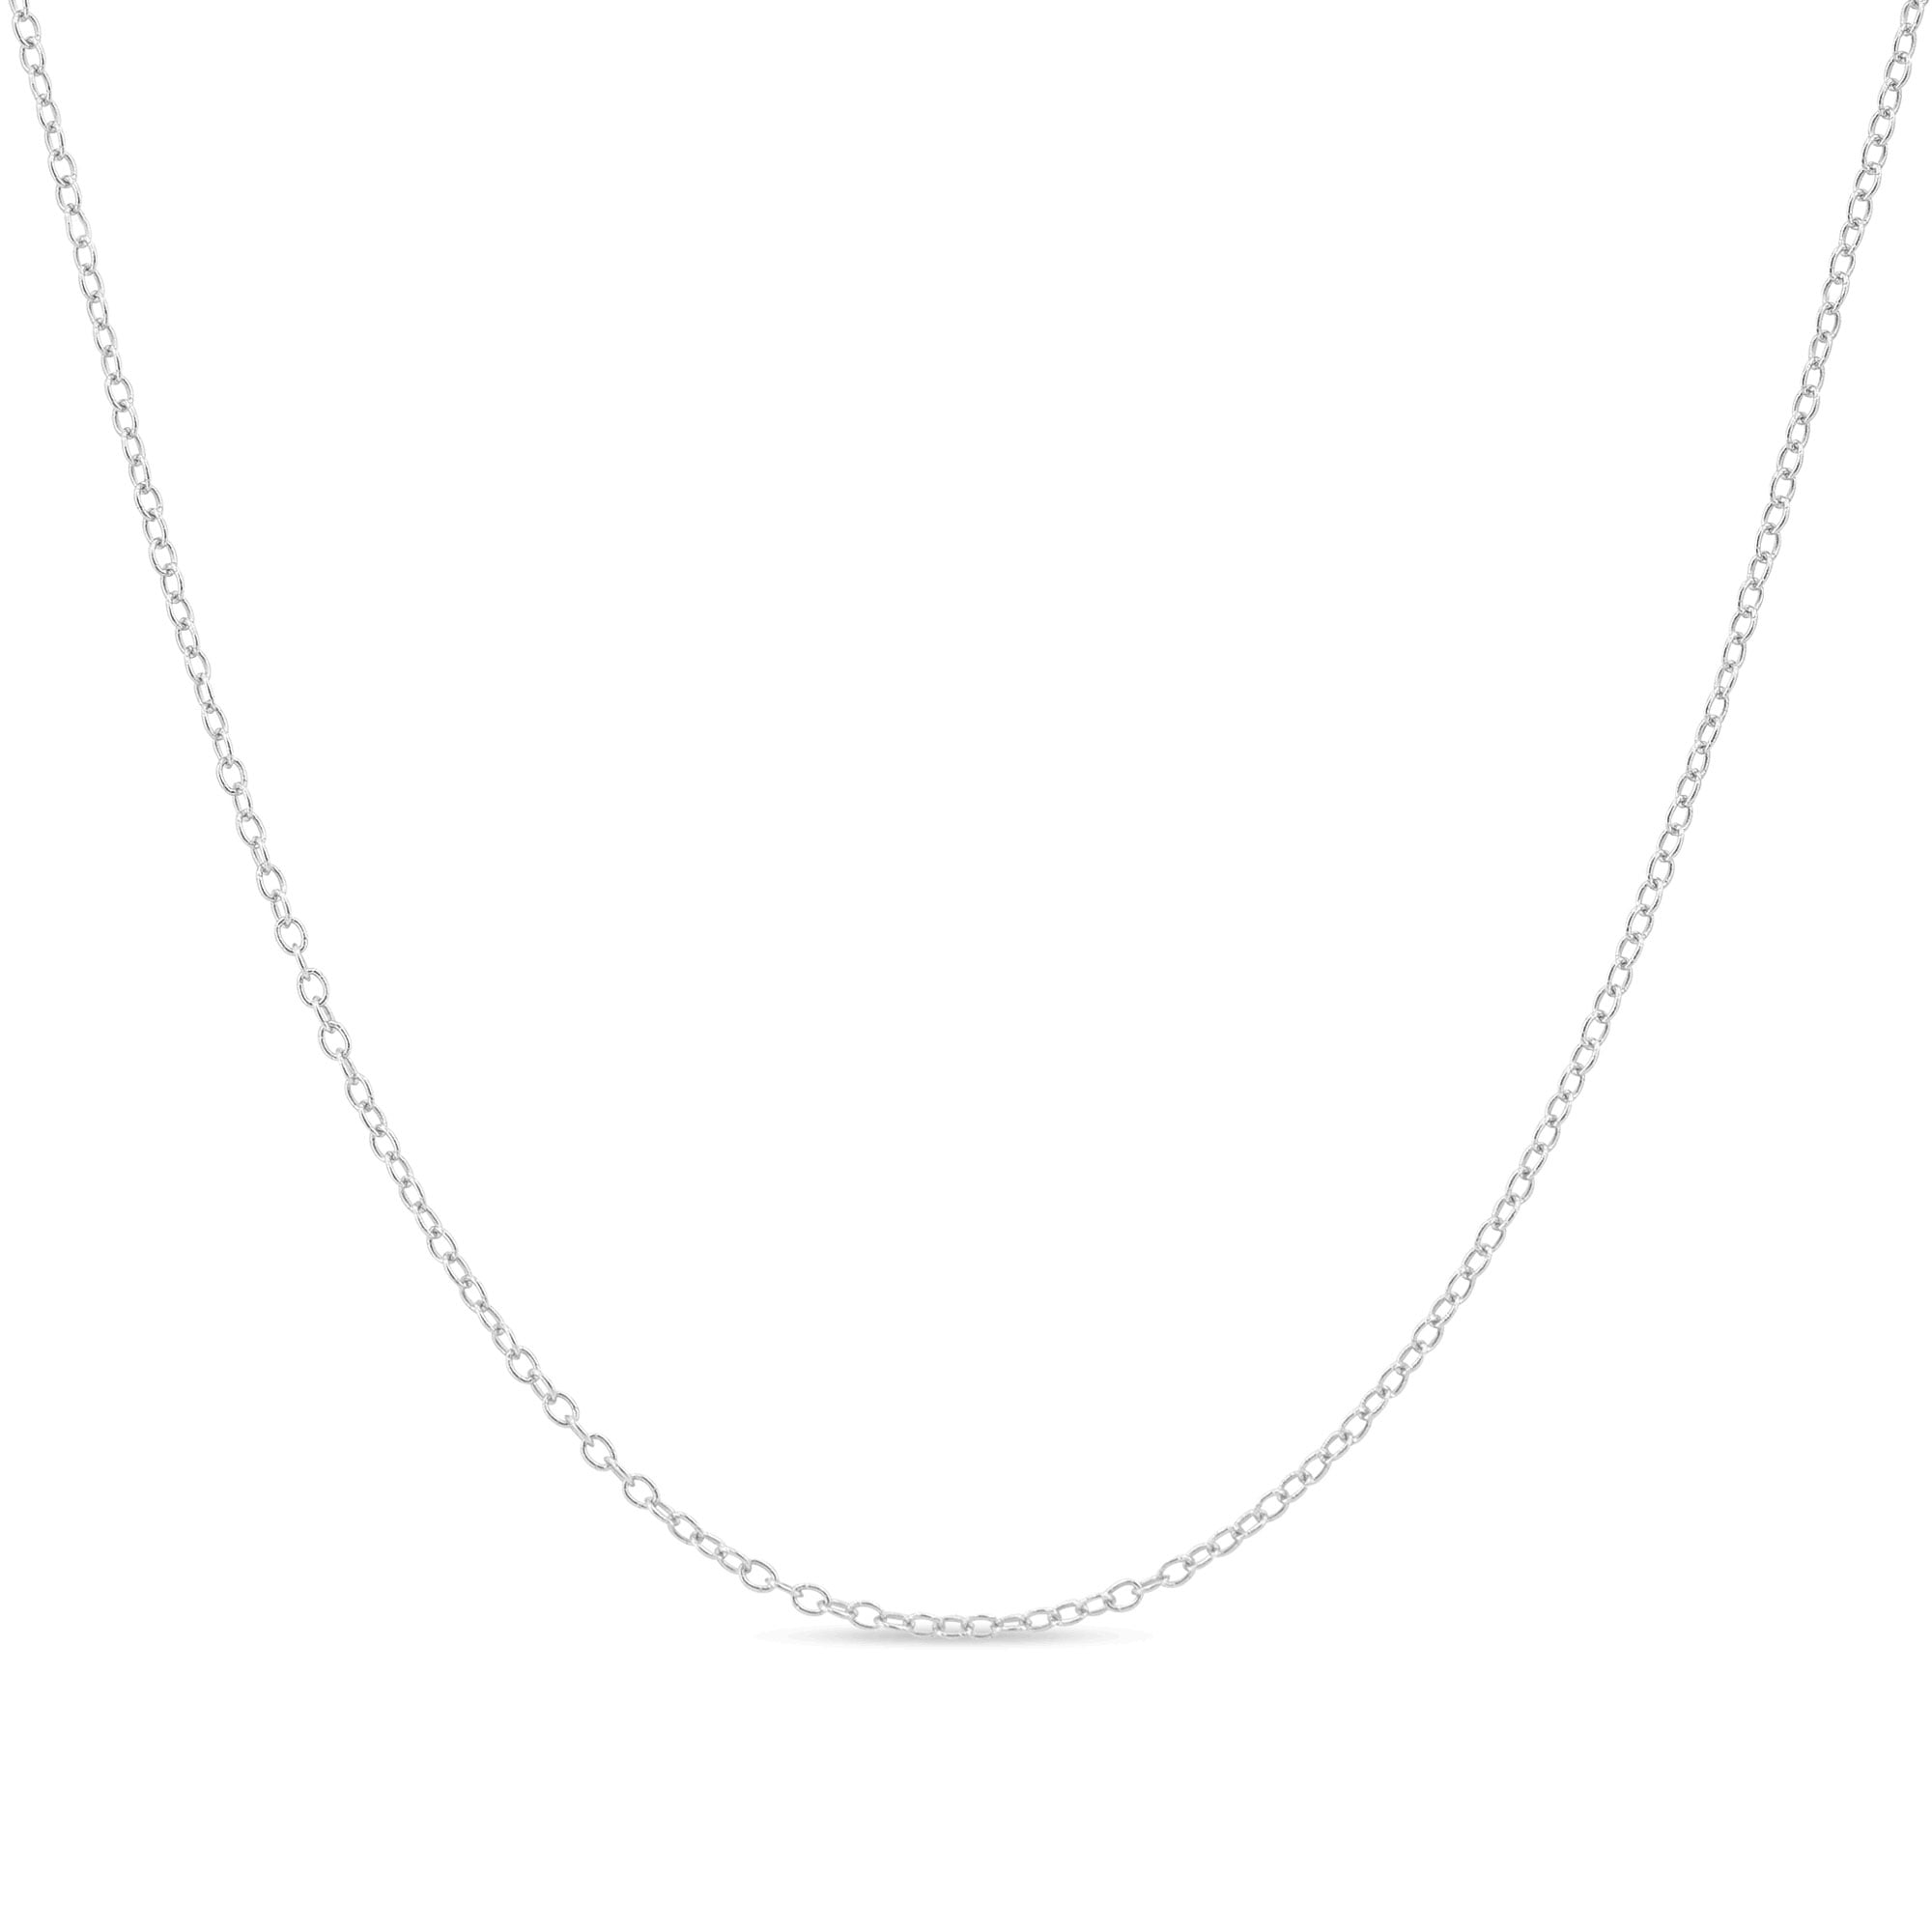 Cable Chain necklace 925 sterling silver, Rose Gold Plated Chain, Gold  Plated Chain 1.00mm